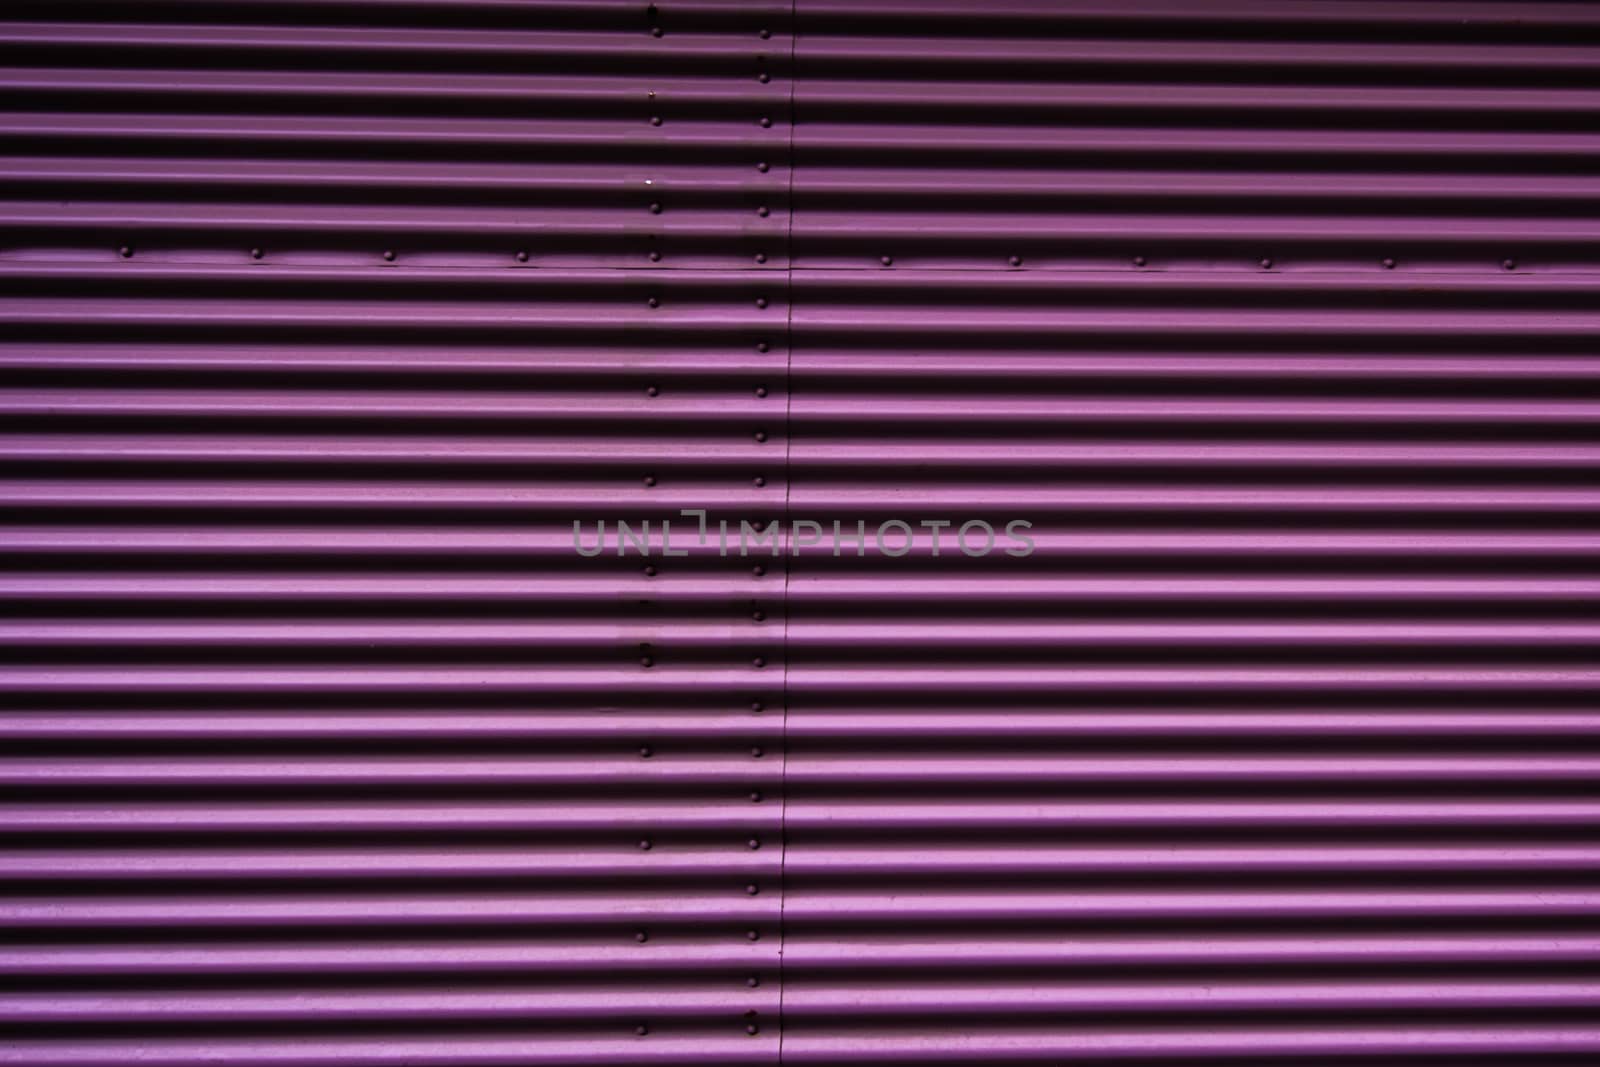 Abstract of a metal entrance in pink or purple colors